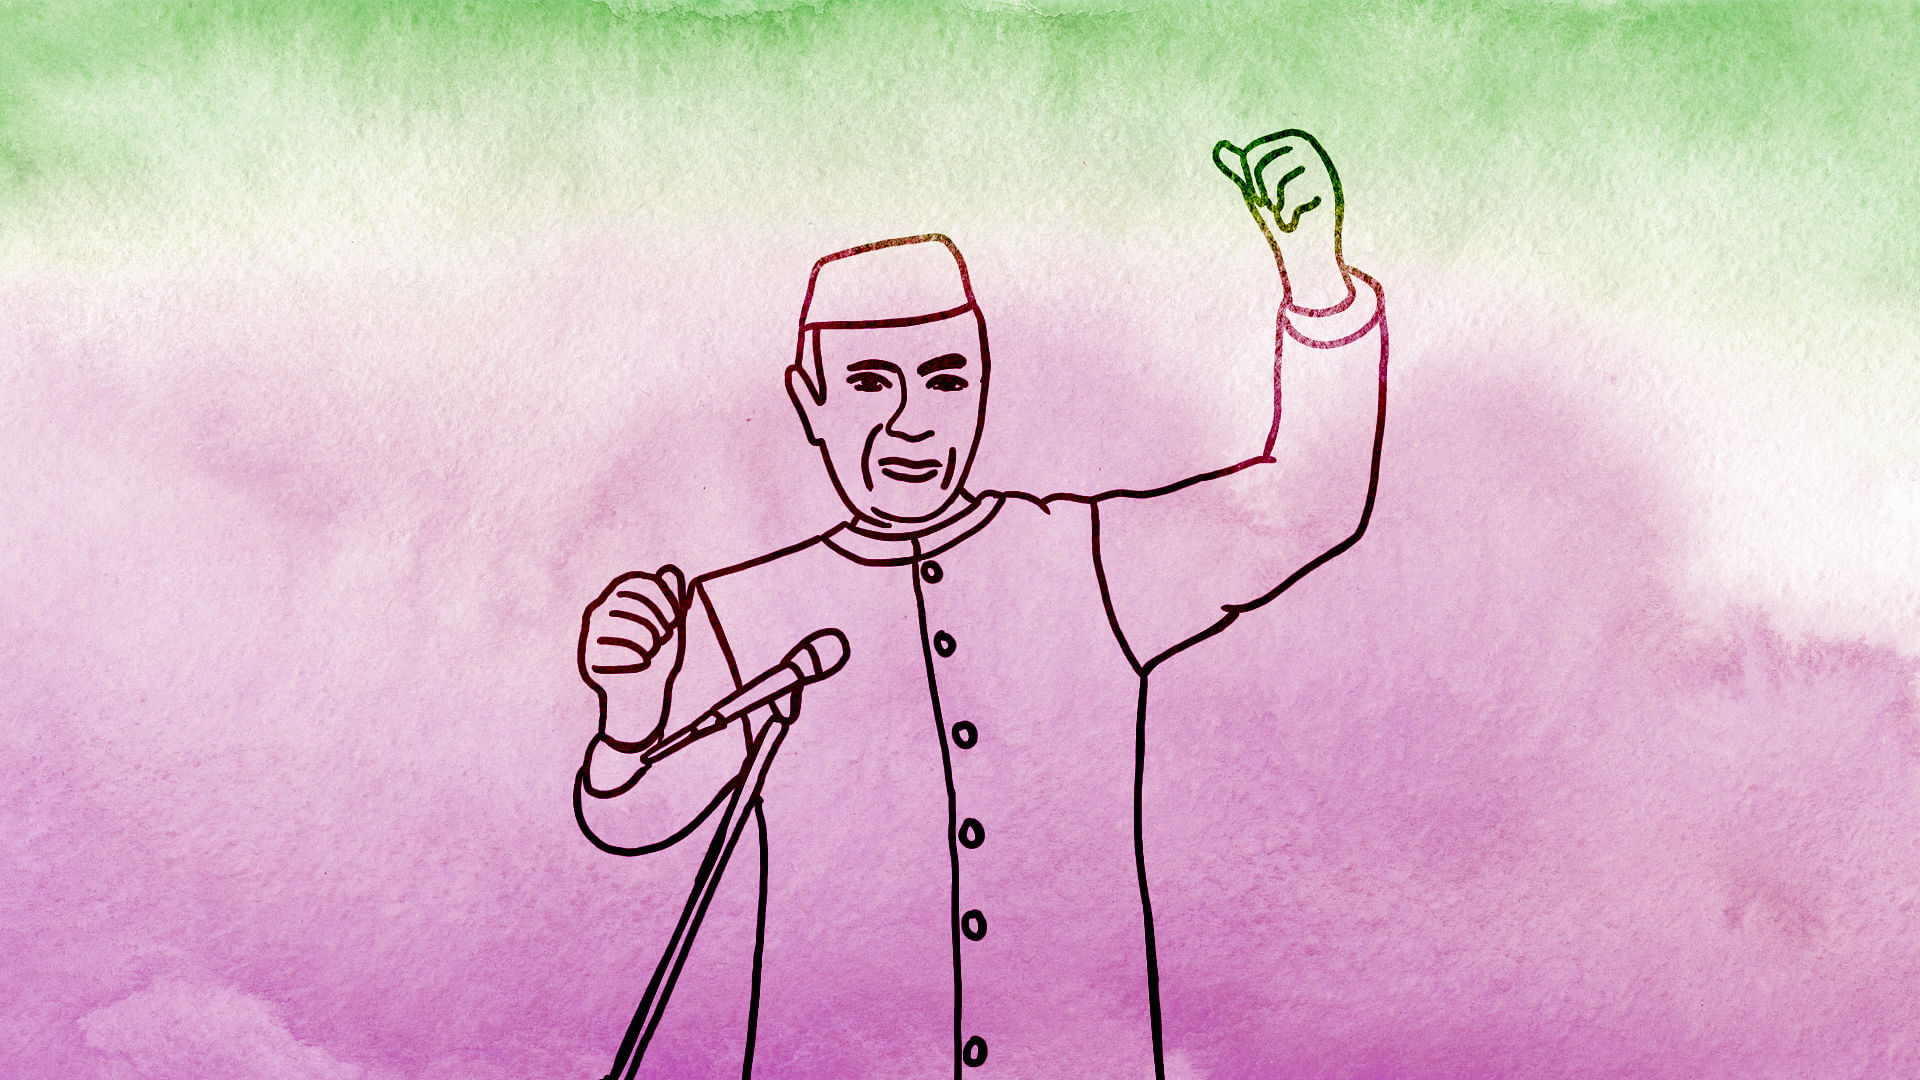 India at 75: Remembering Jawaharlal Nehru, the maker of modern India |  Op-eds – Gulf News